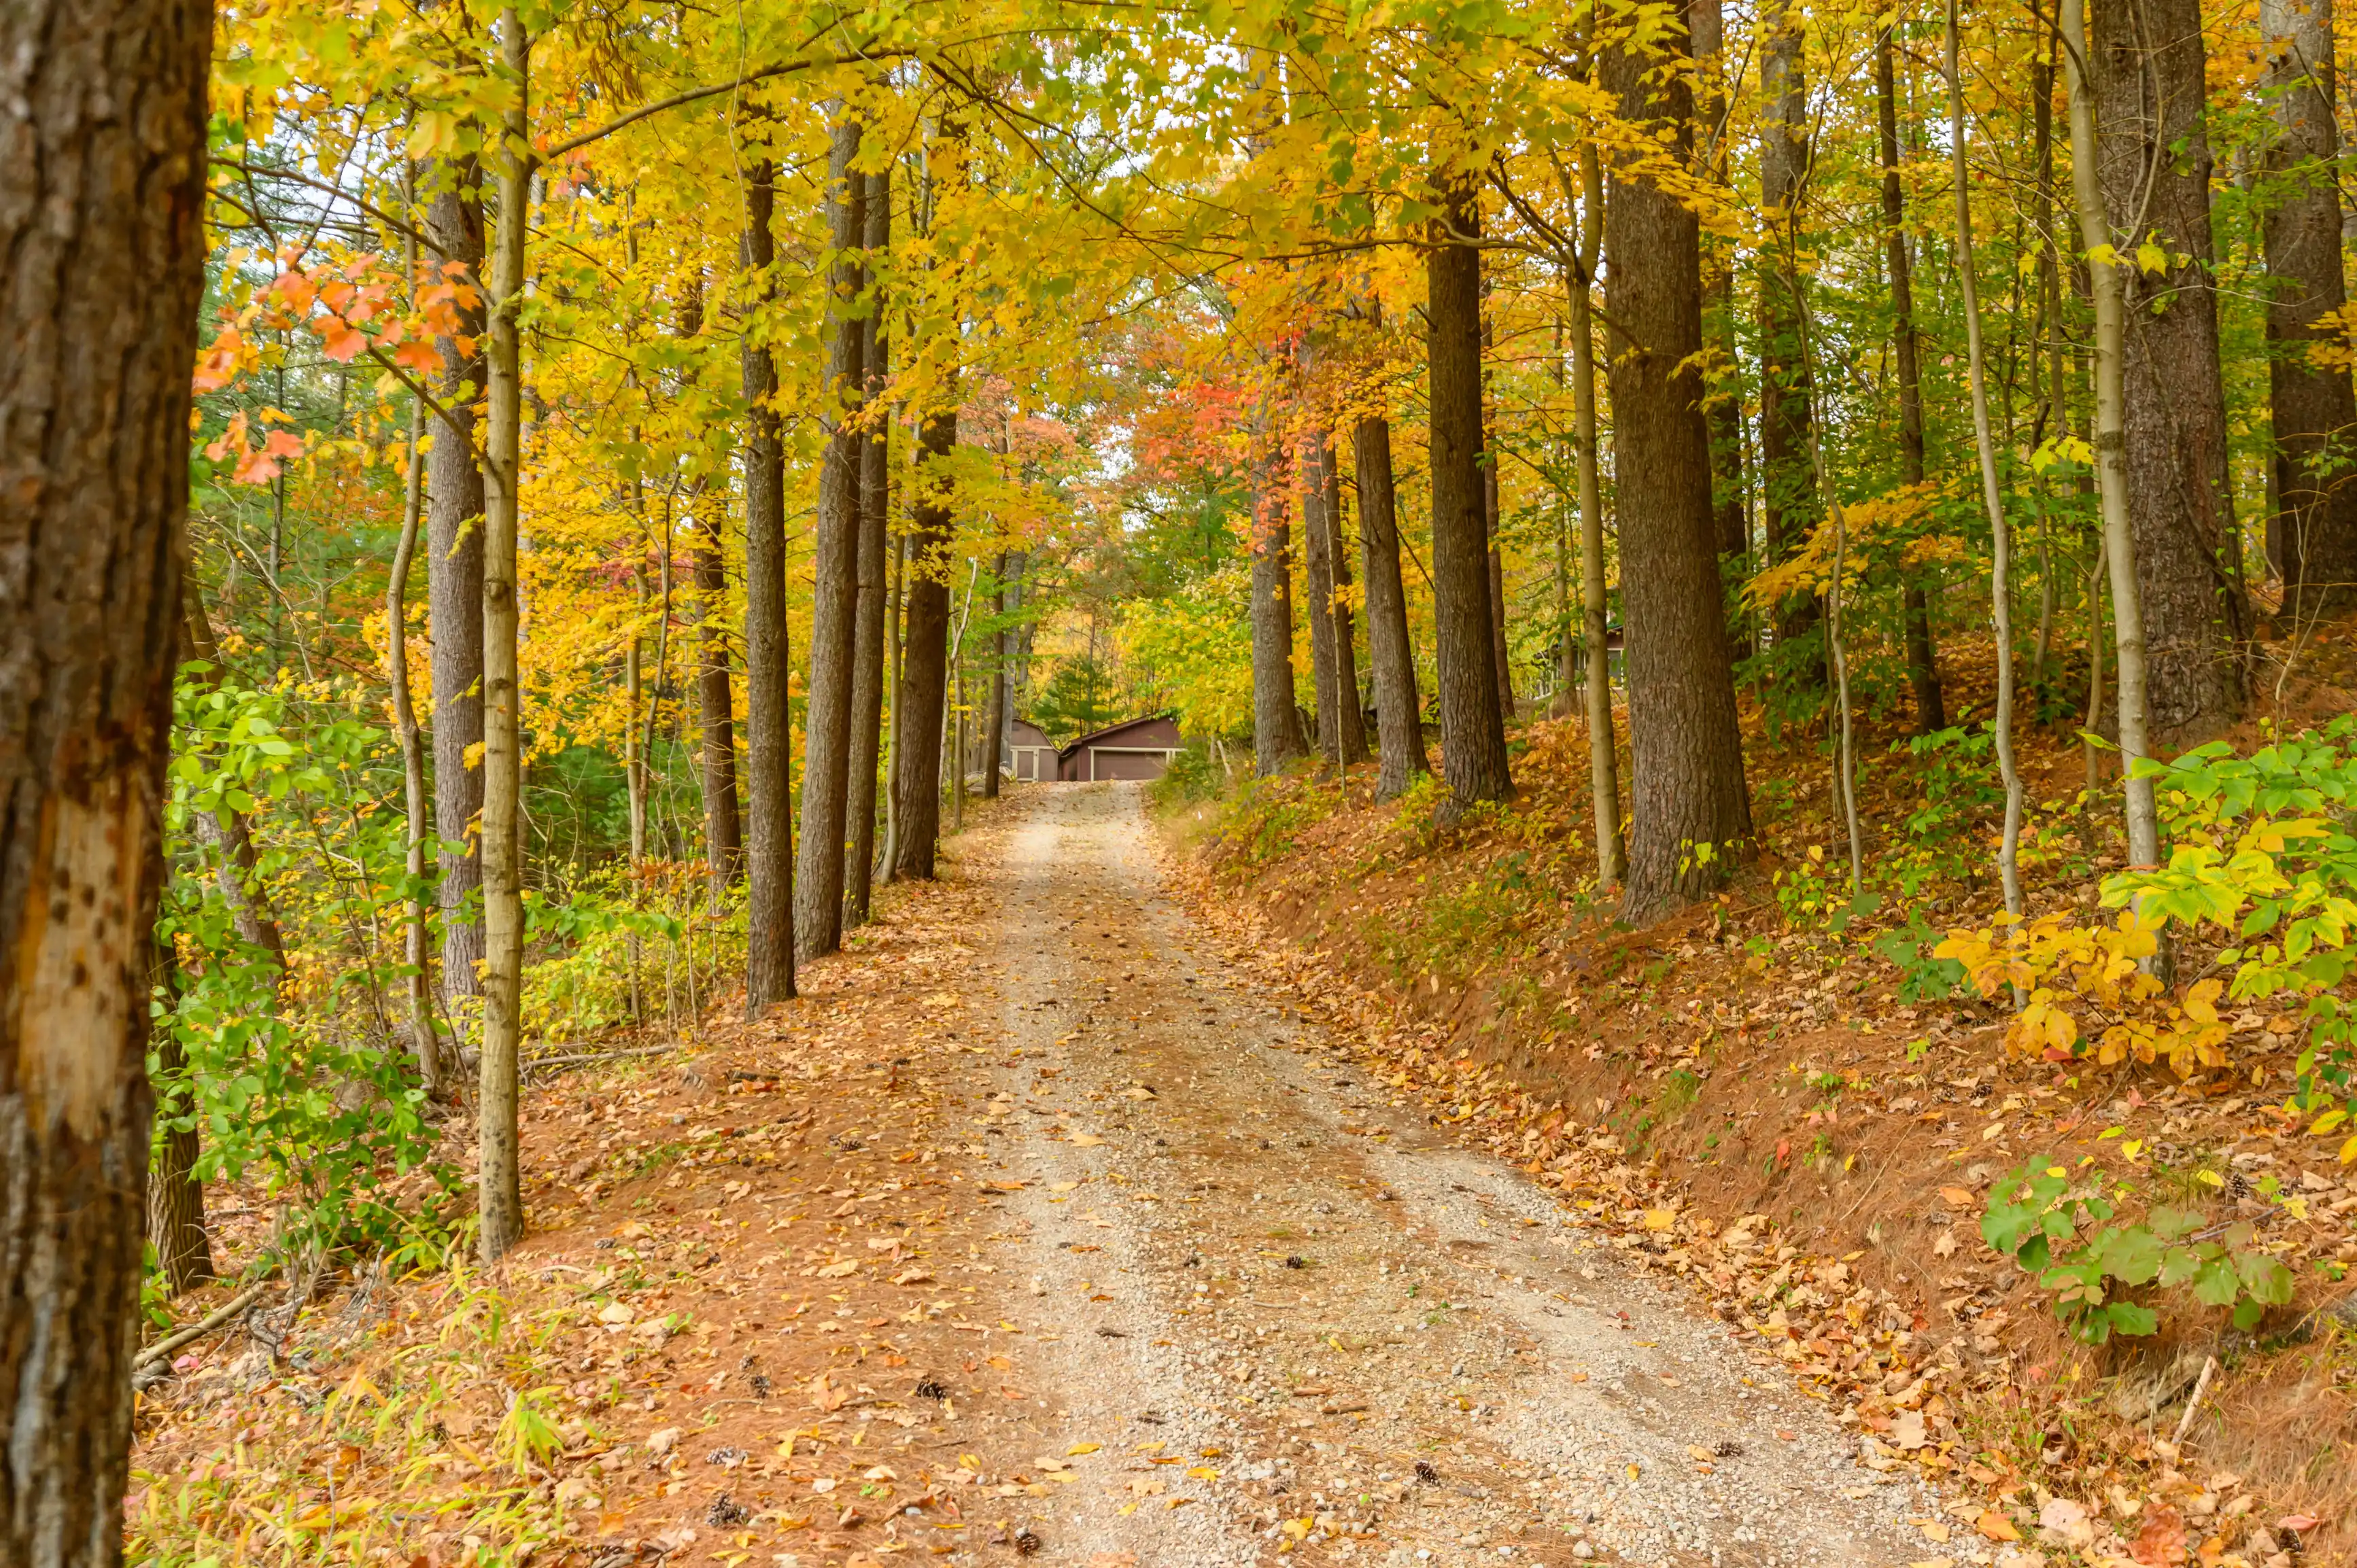 Dirt path winding through a forest with colorful autumn foliage.